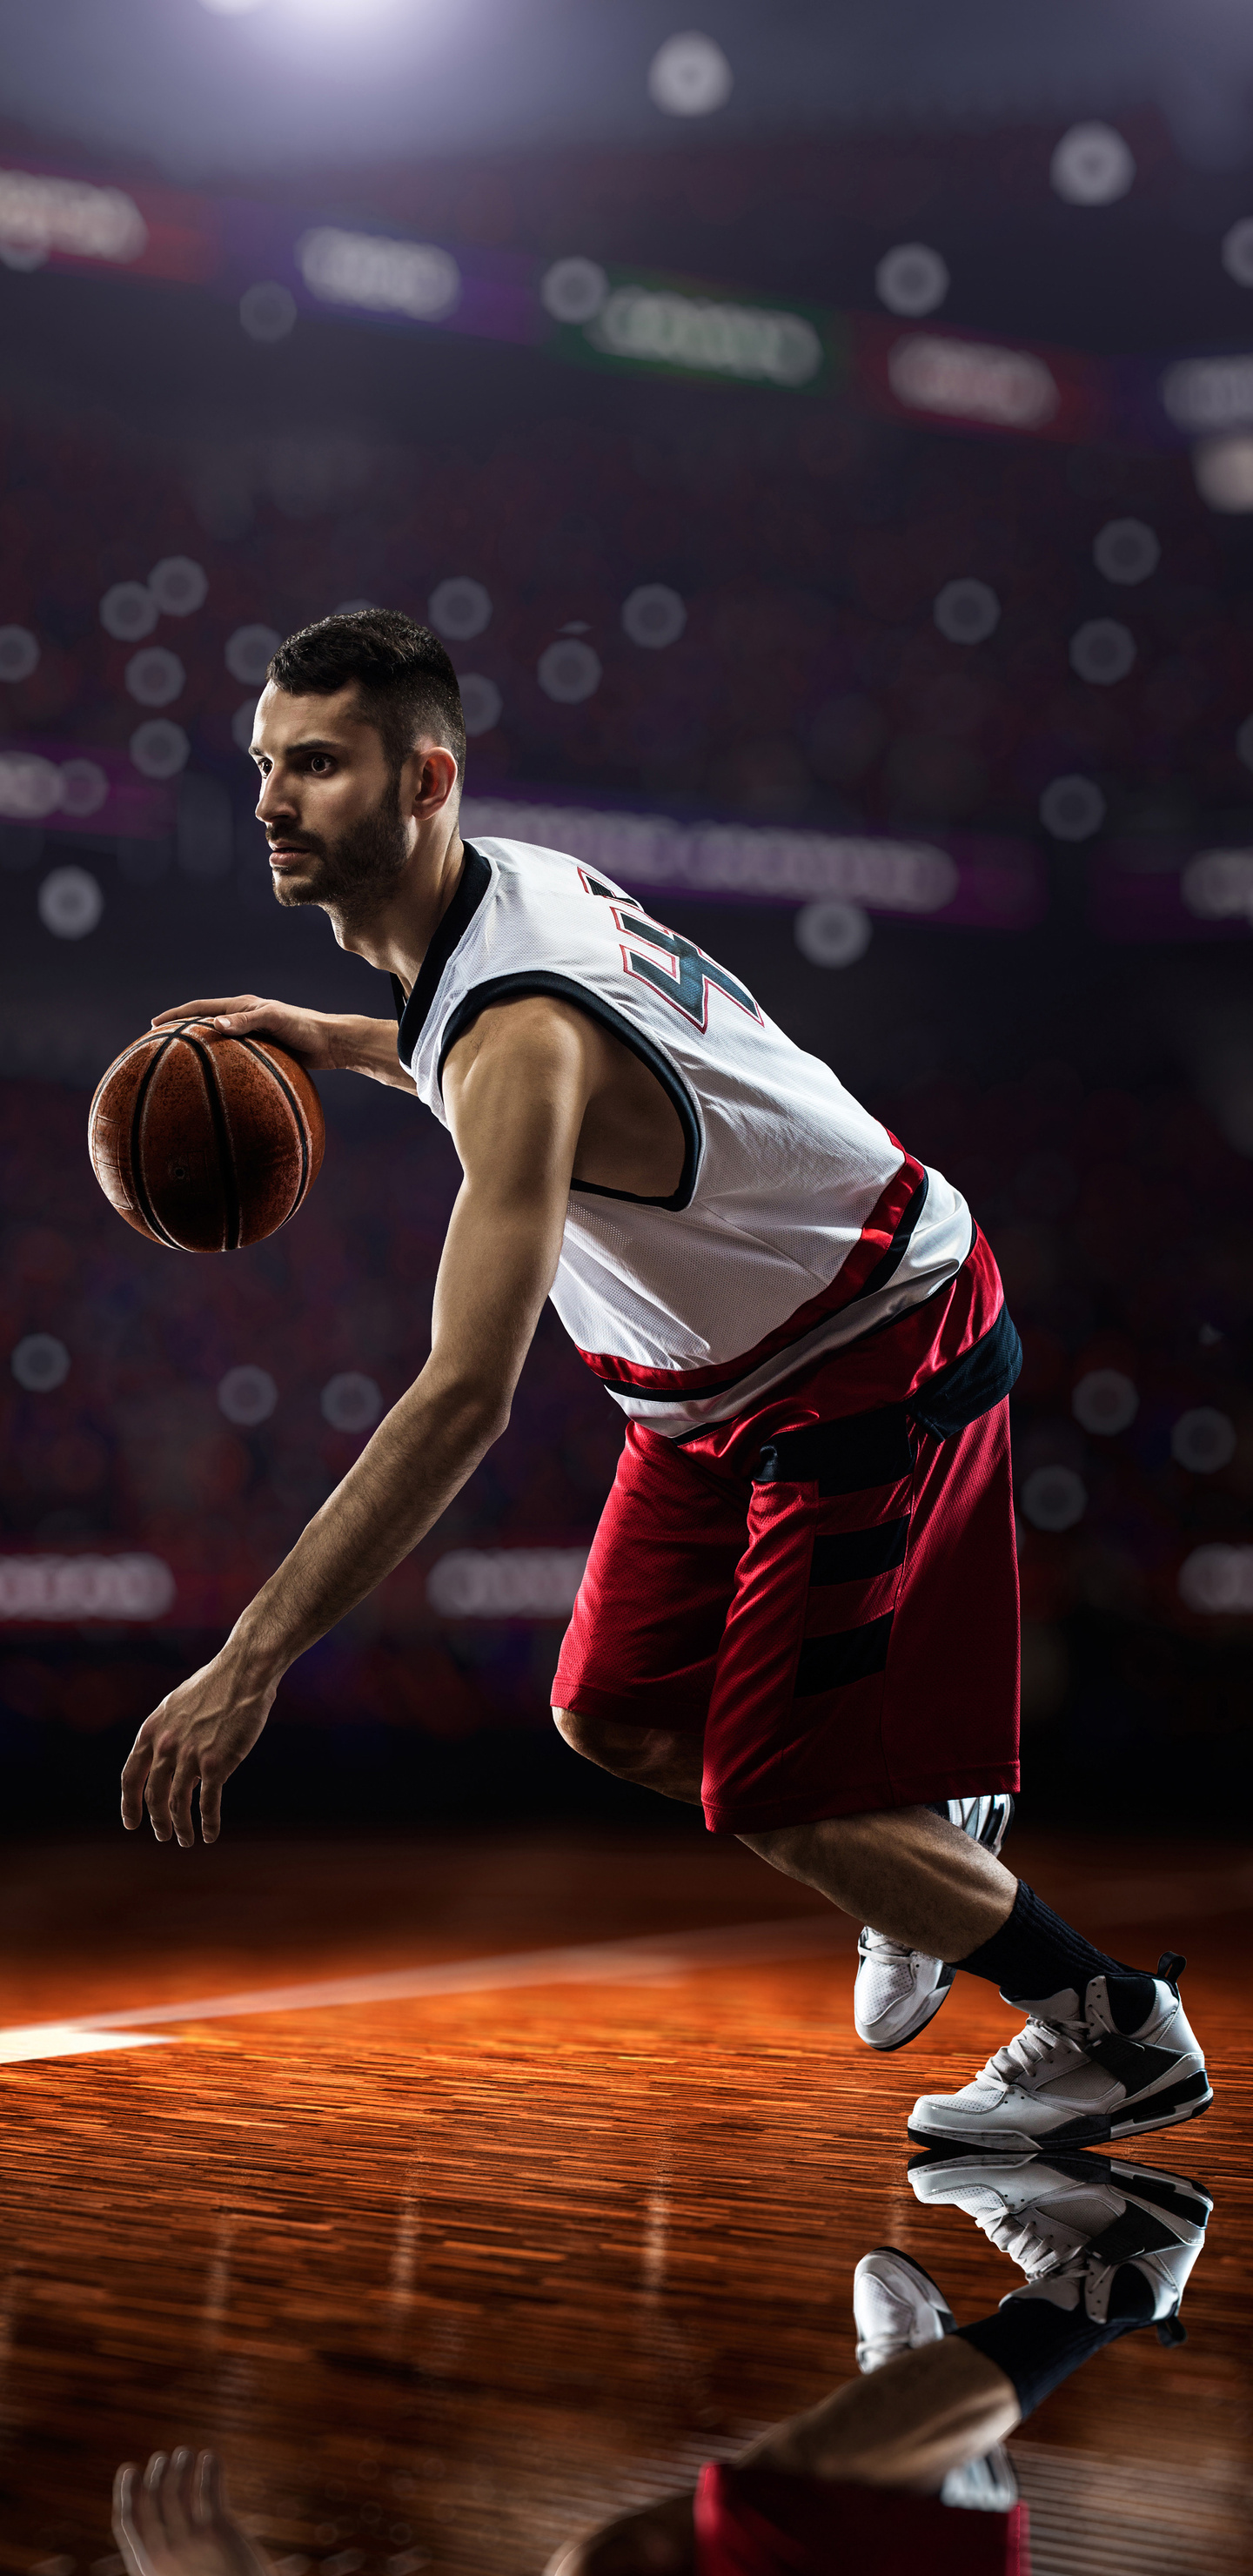 Basketball Player 8k Samsung Galaxy Note S S SQHD HD 4k Wallpaper, Image, Background, Photo and Picture